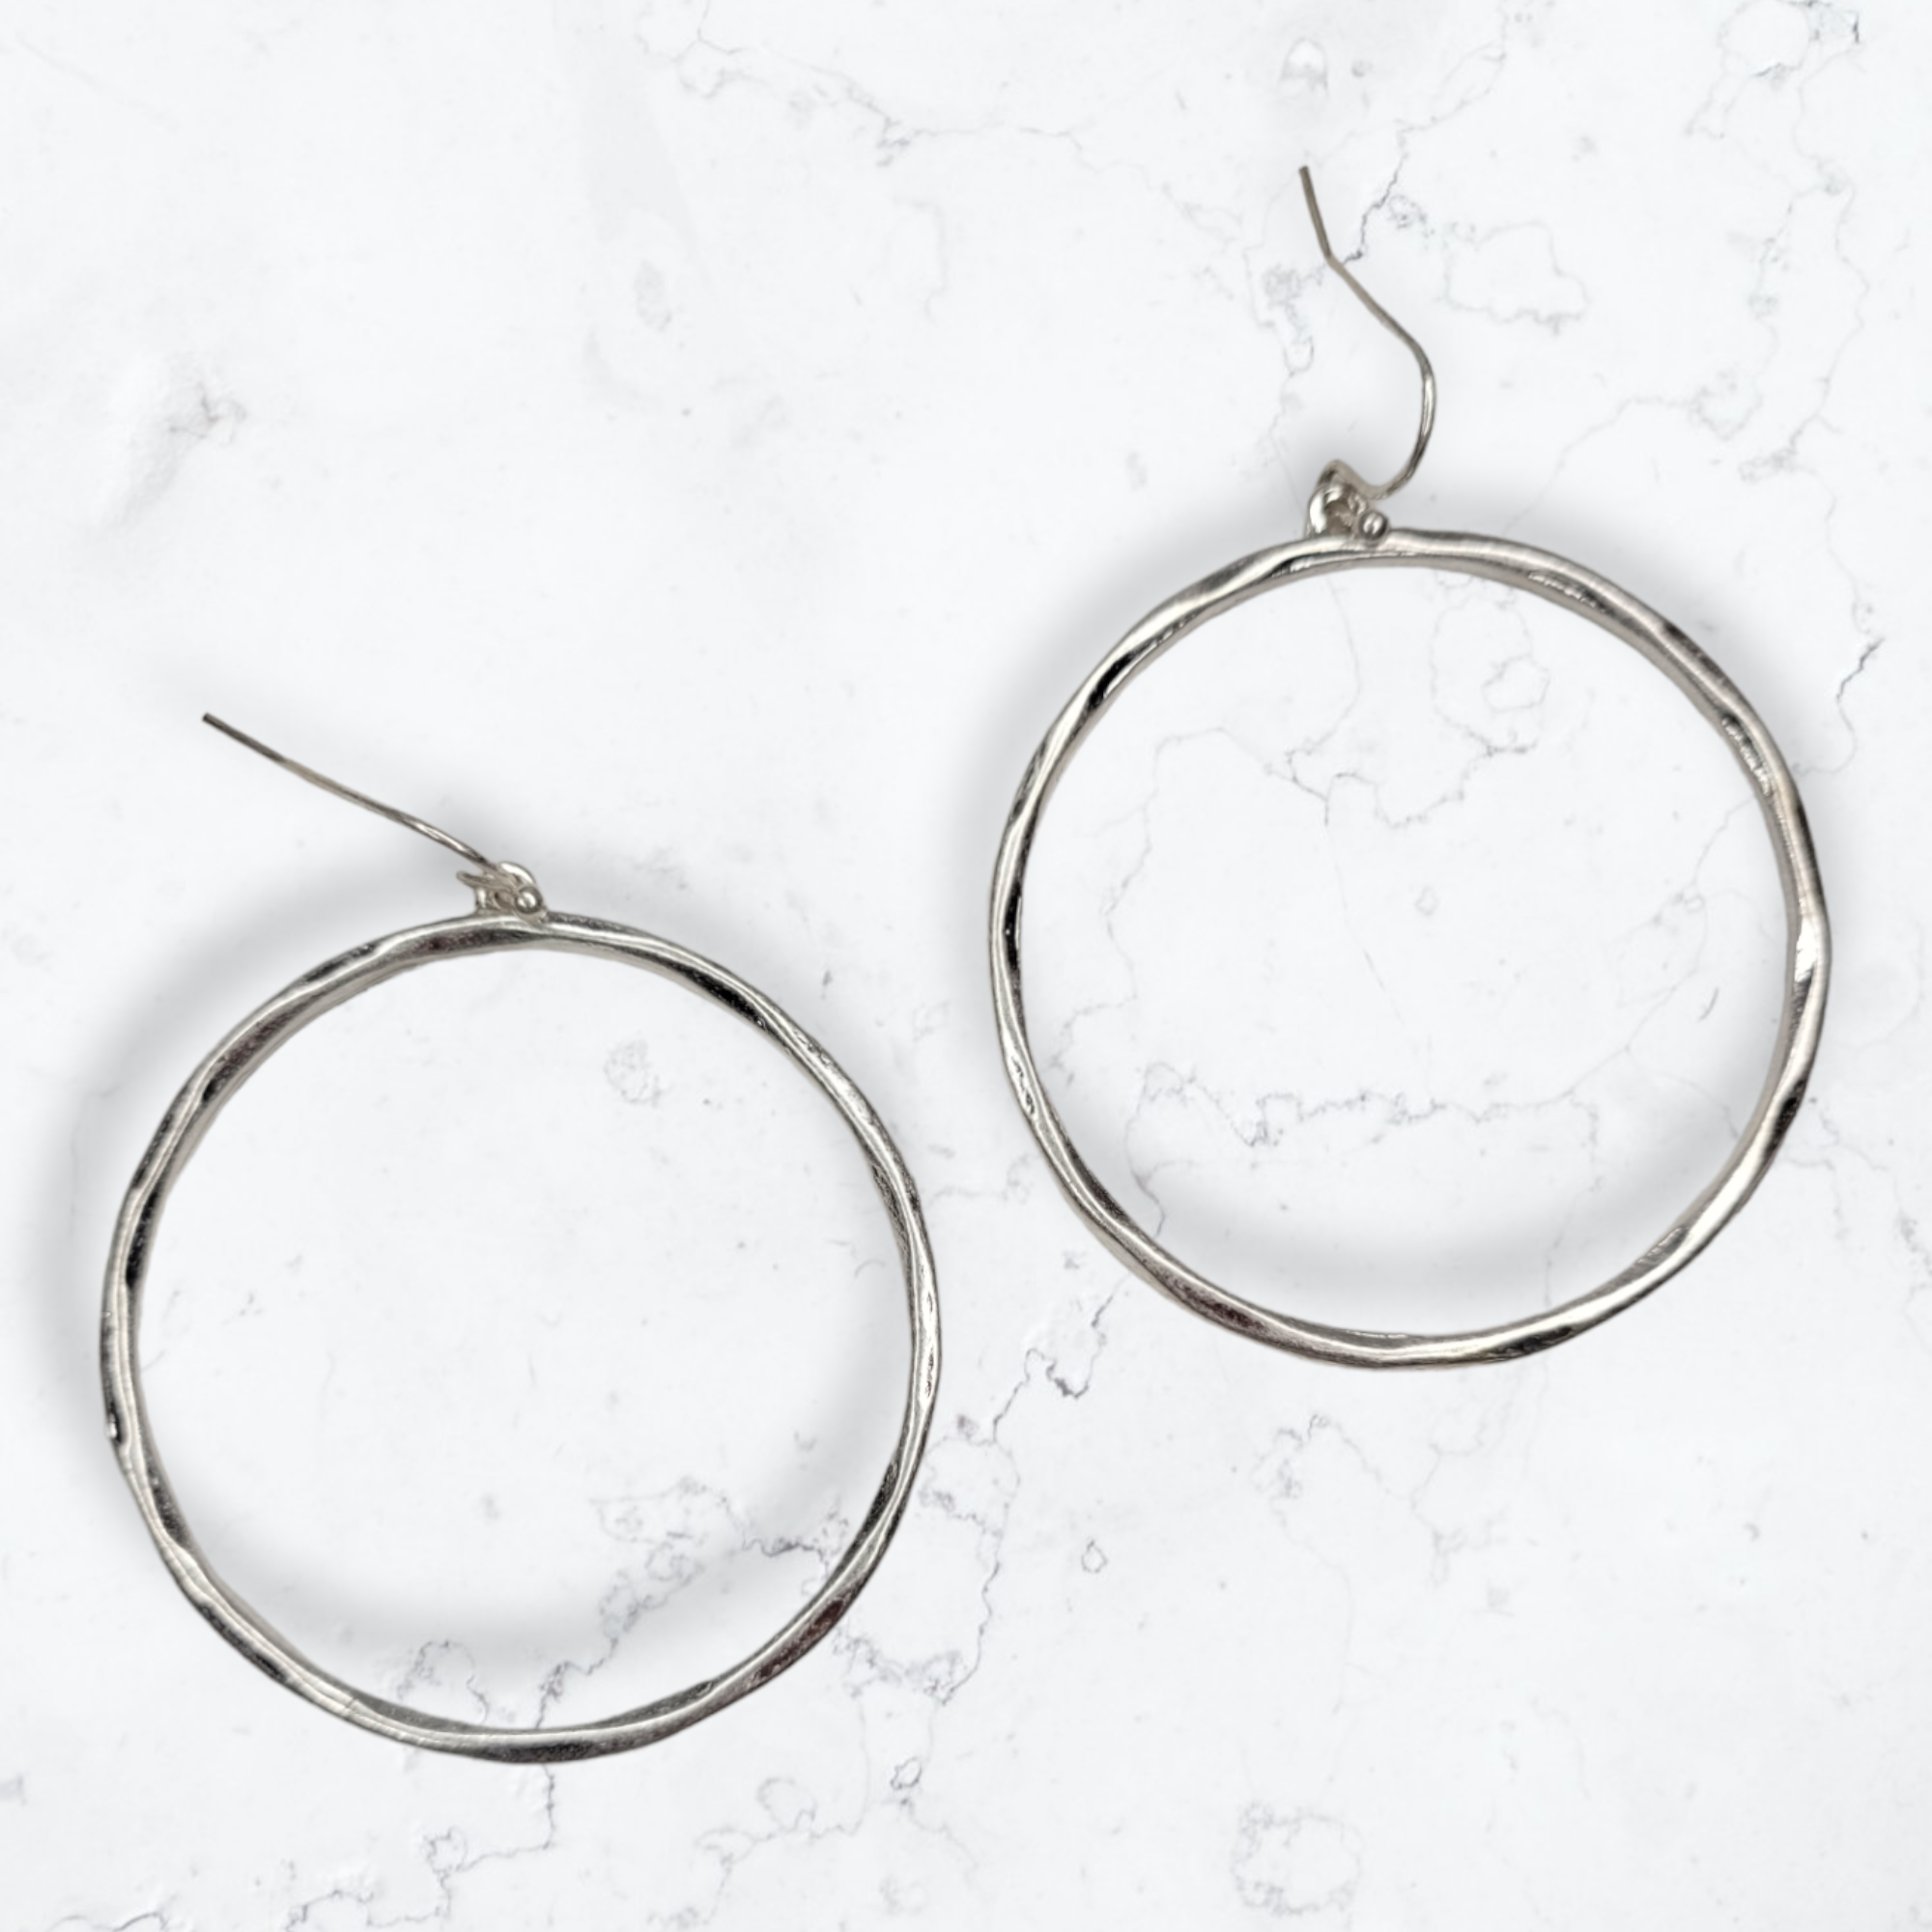 Hammered Silver Hoops-Earrings-LouisGeorge Boutique-LouisGeorge Boutique, Women’s Fashion Boutique Located in Trussville, Alabama